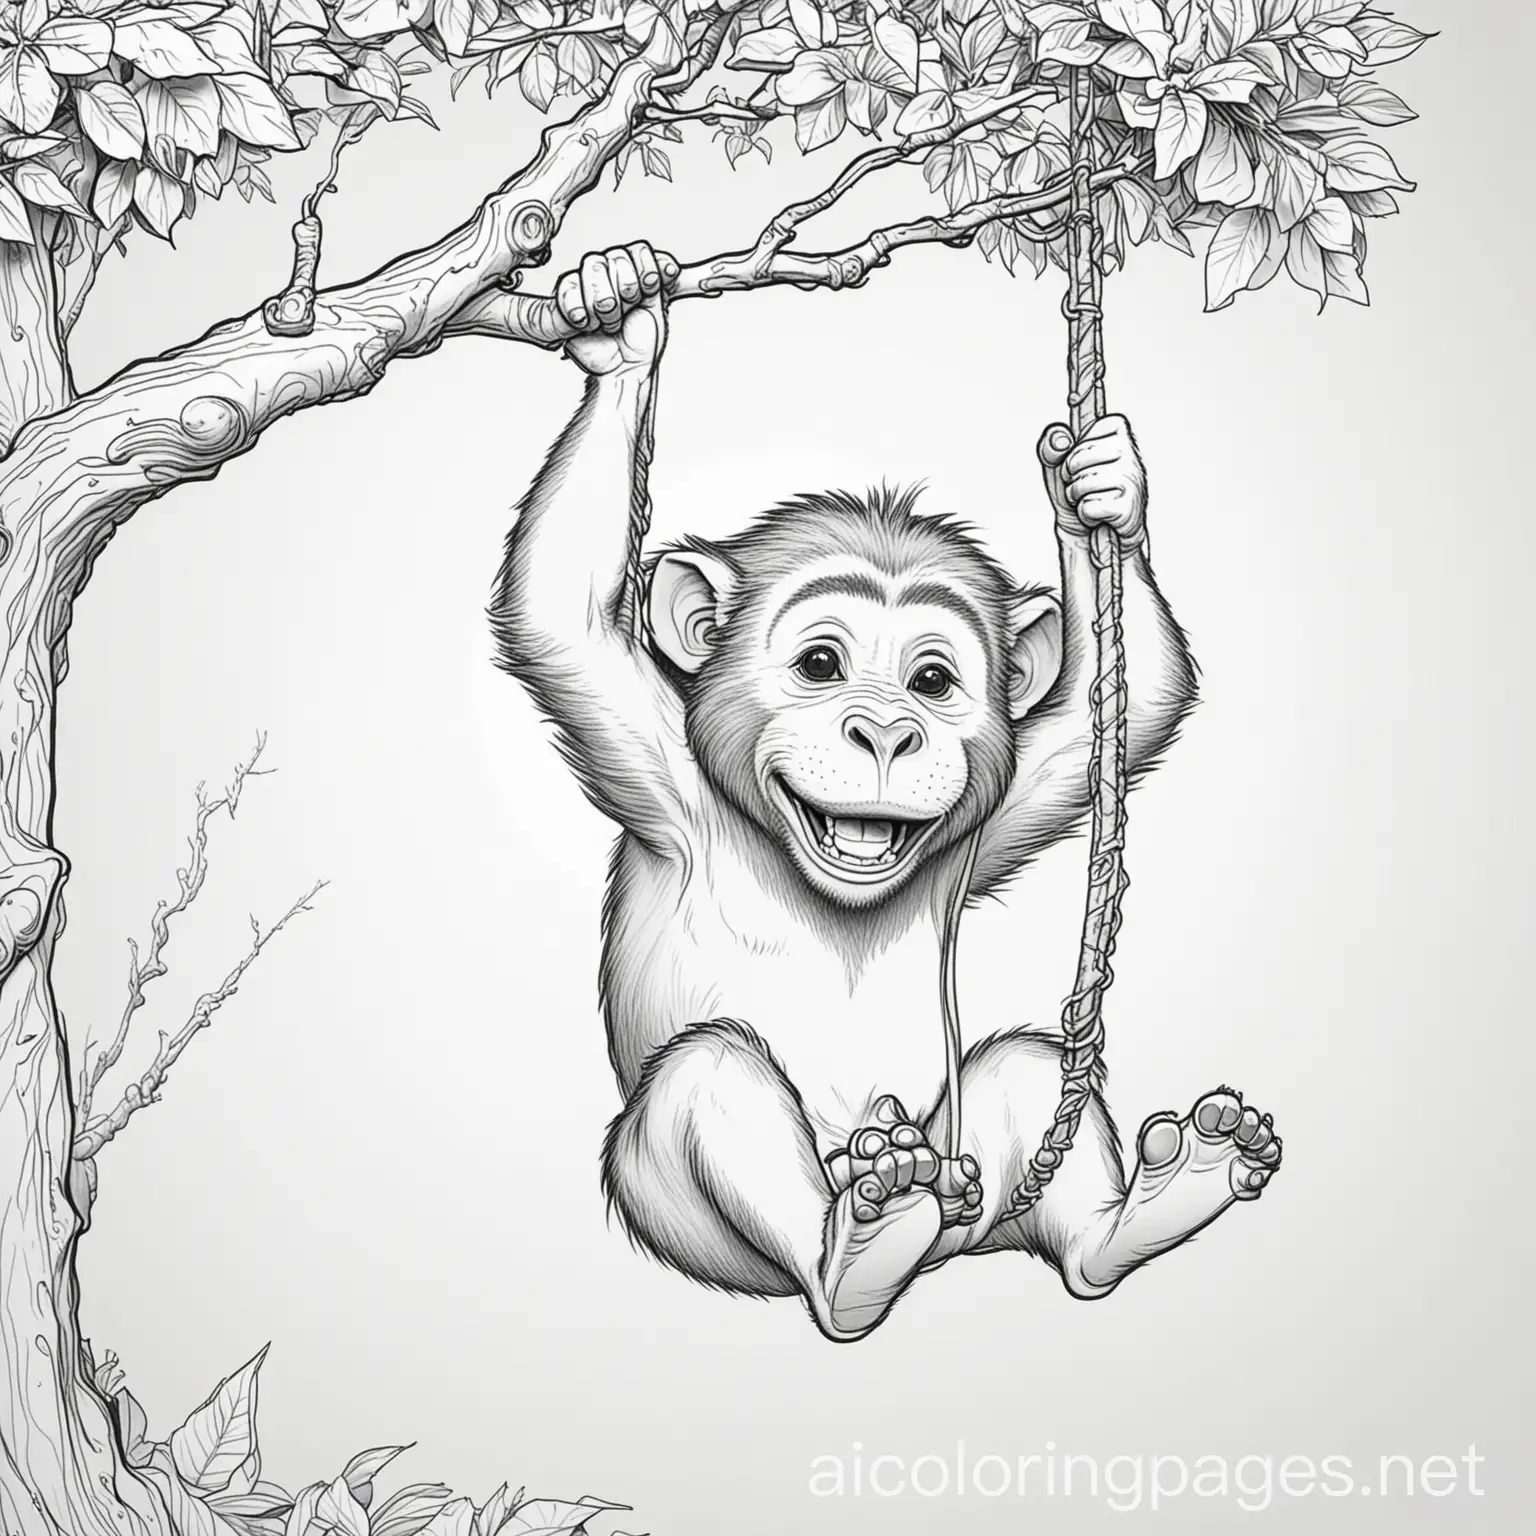 cartoon happy baboon swinging from a tree, Coloring Page, black and white, line art, white background, Simplicity, Ample White Space. The background of the coloring page is plain white to make it easy for young children to color within the lines. The outlines of all the subjects are easy to distinguish, making it simple for kids to color without too much difficulty